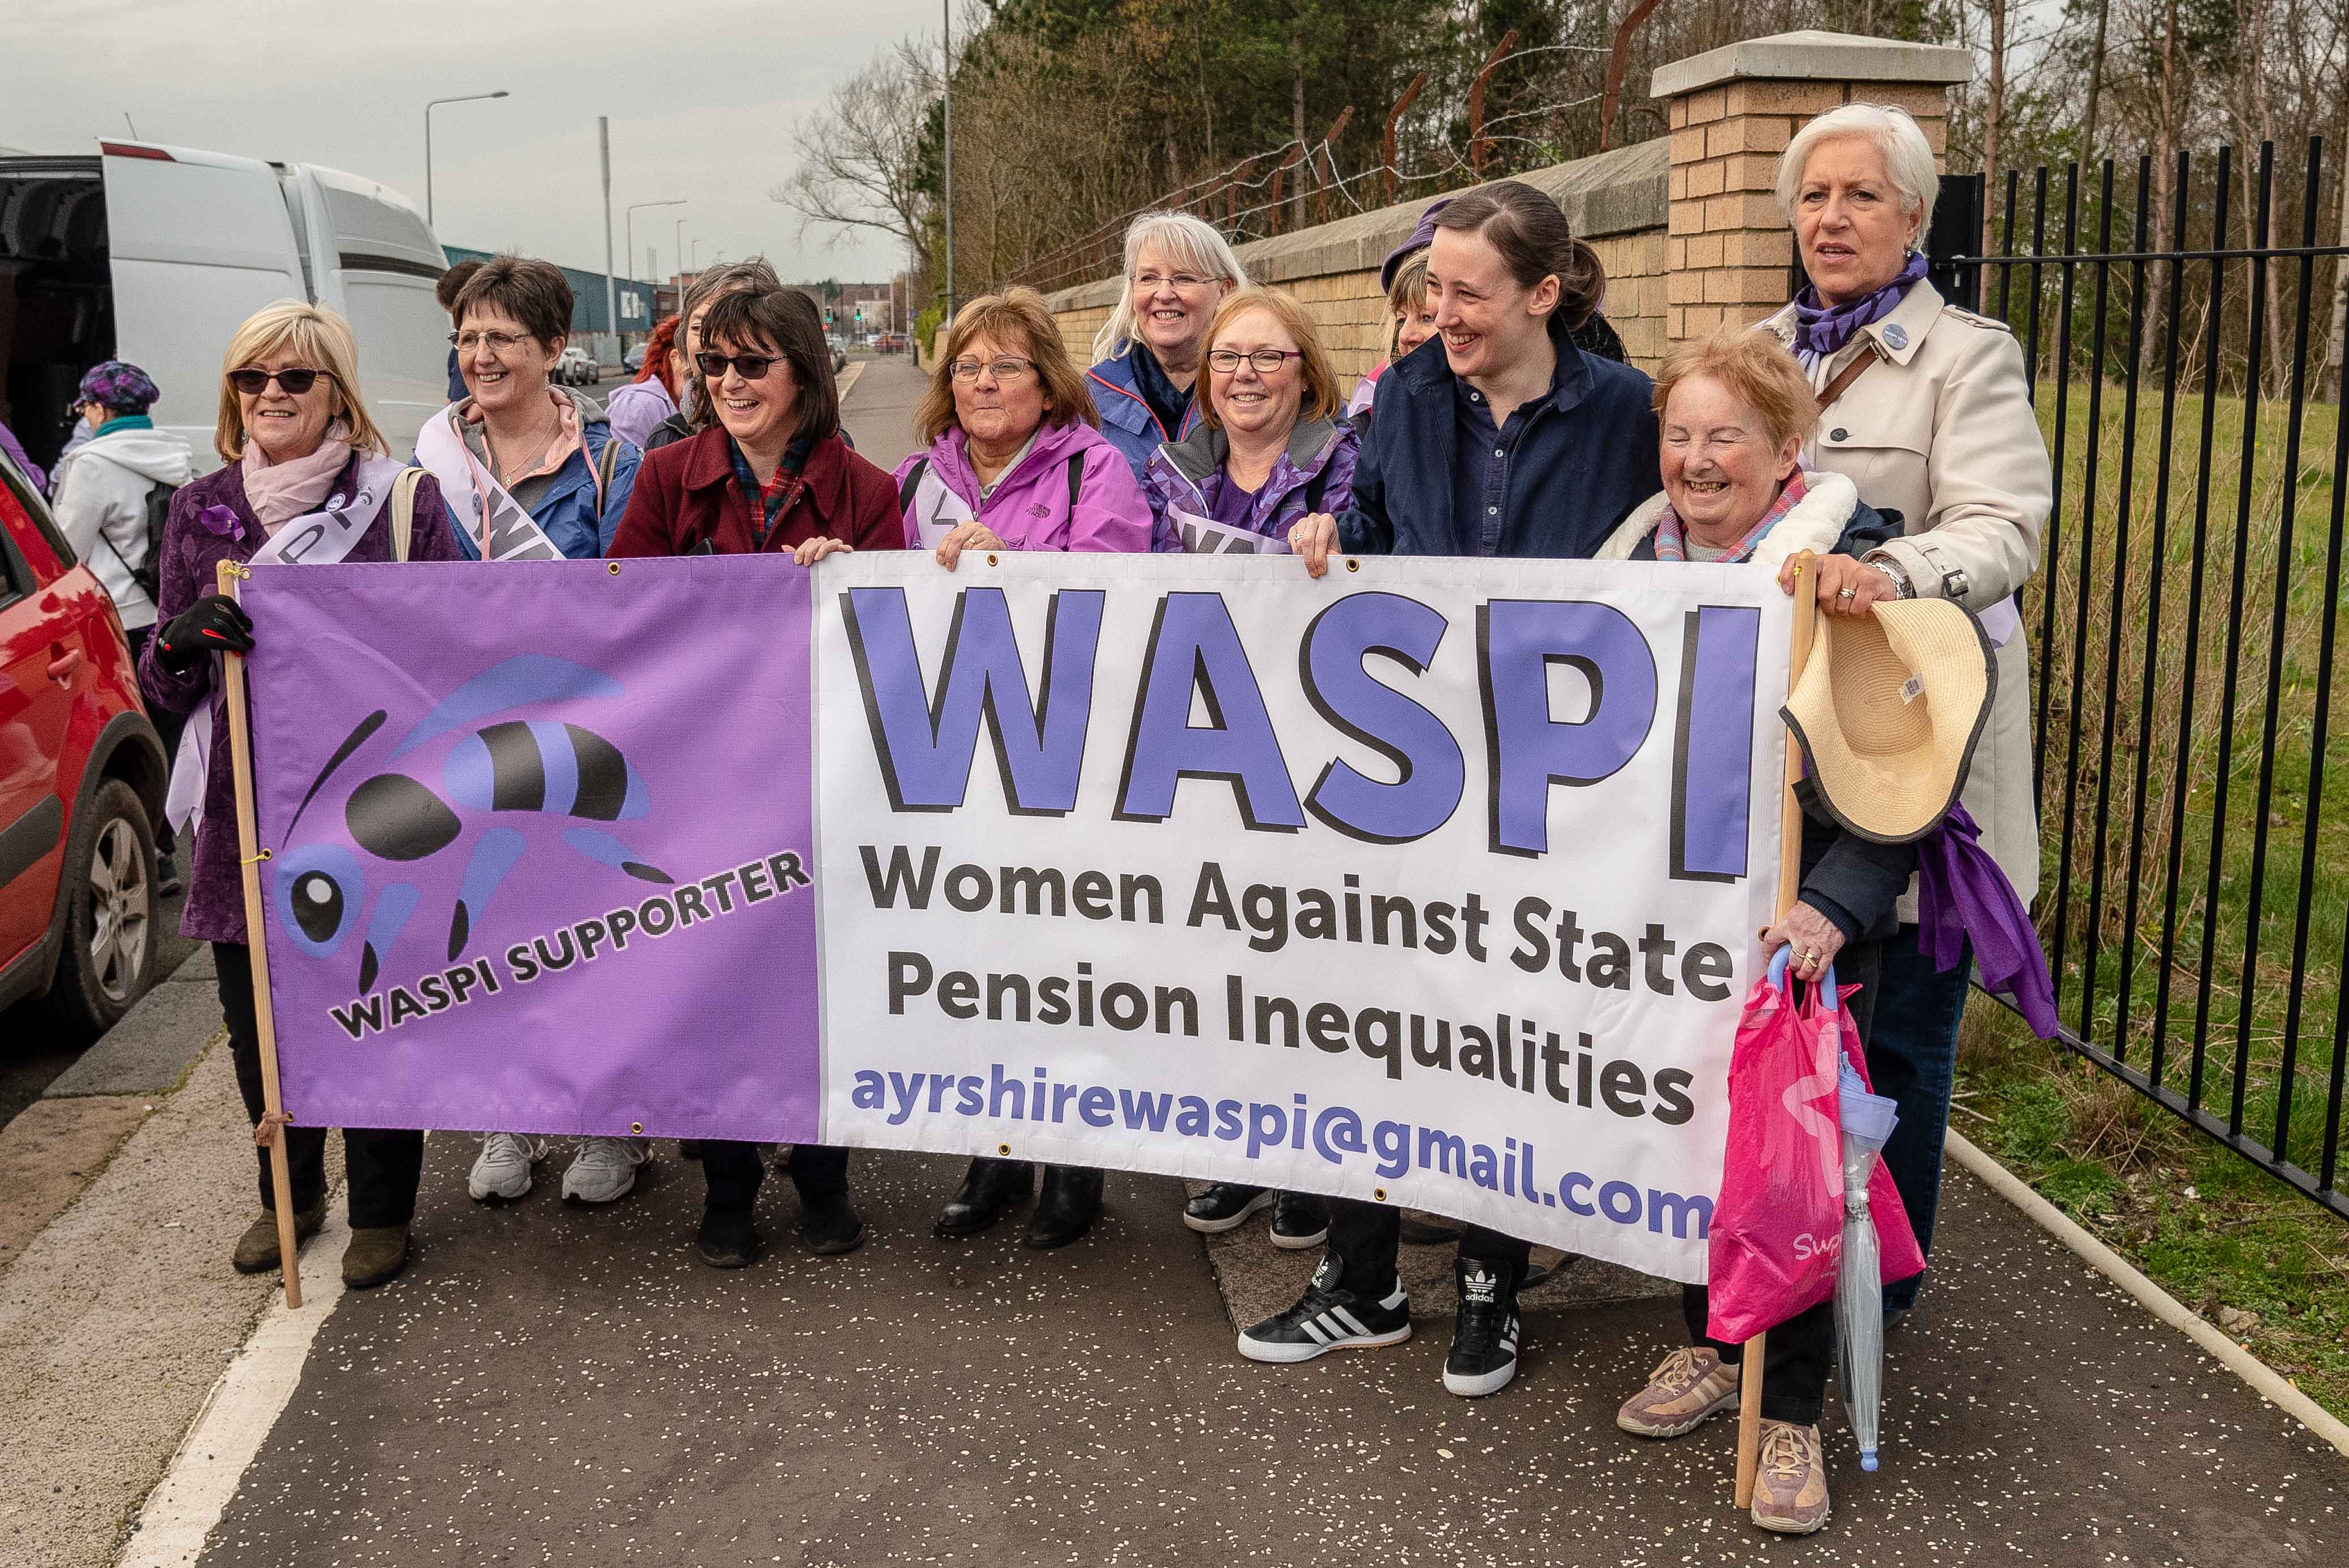 Govan, 2019/02/23: Campaigners from all over Scotland took part in a protest against the changes in the state pension for women. WASPI (Women Against State Pension Injustice) and several other groups took to the streets in protest. (Photo by Stewart Kirby/SOPA Images/LightRocket via Getty Images)